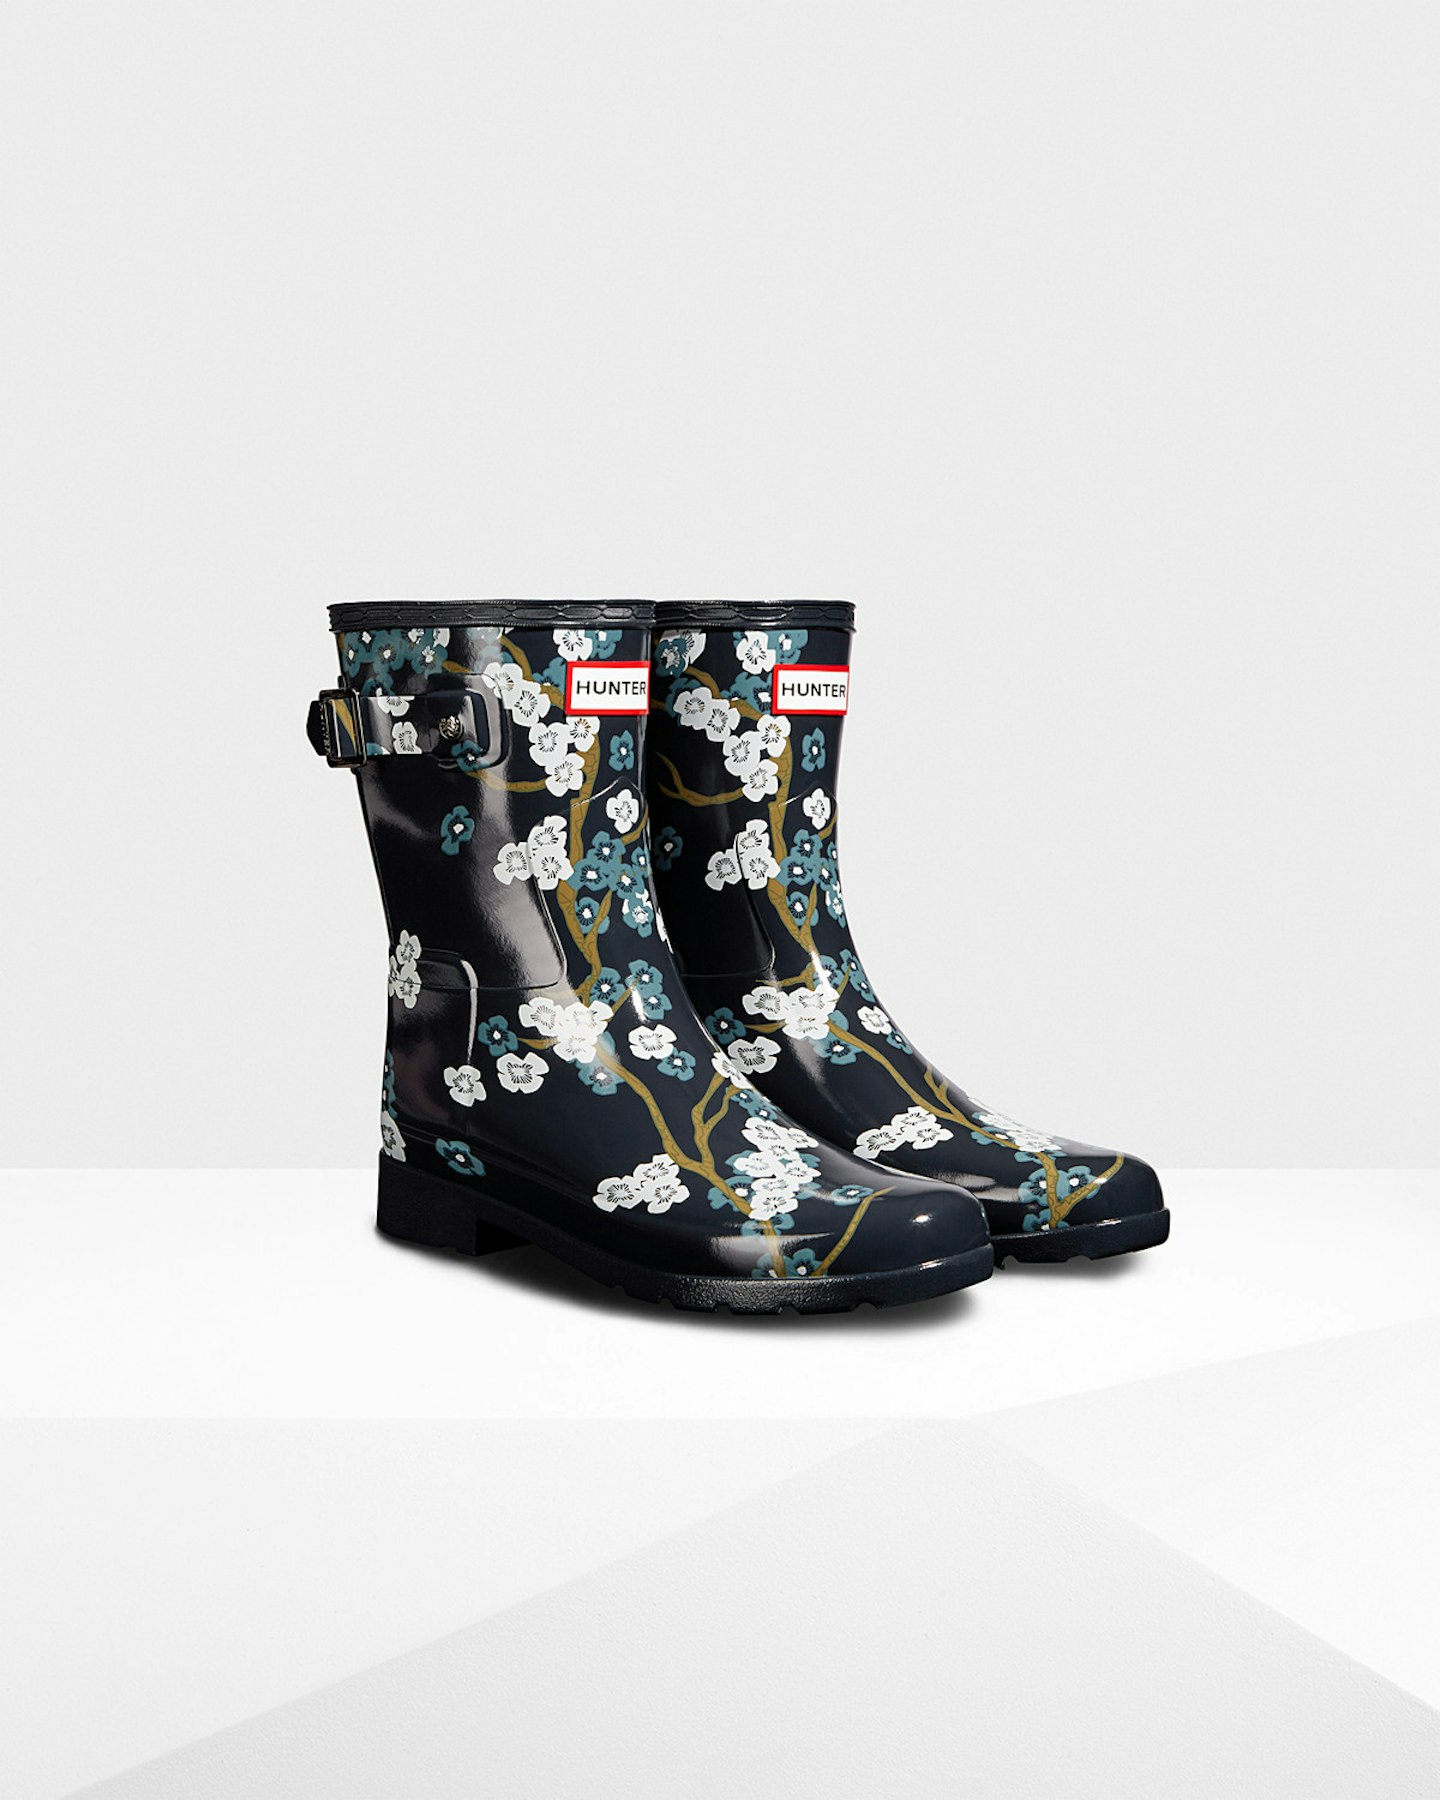 Blossom print wellington boots by Hunter, £100